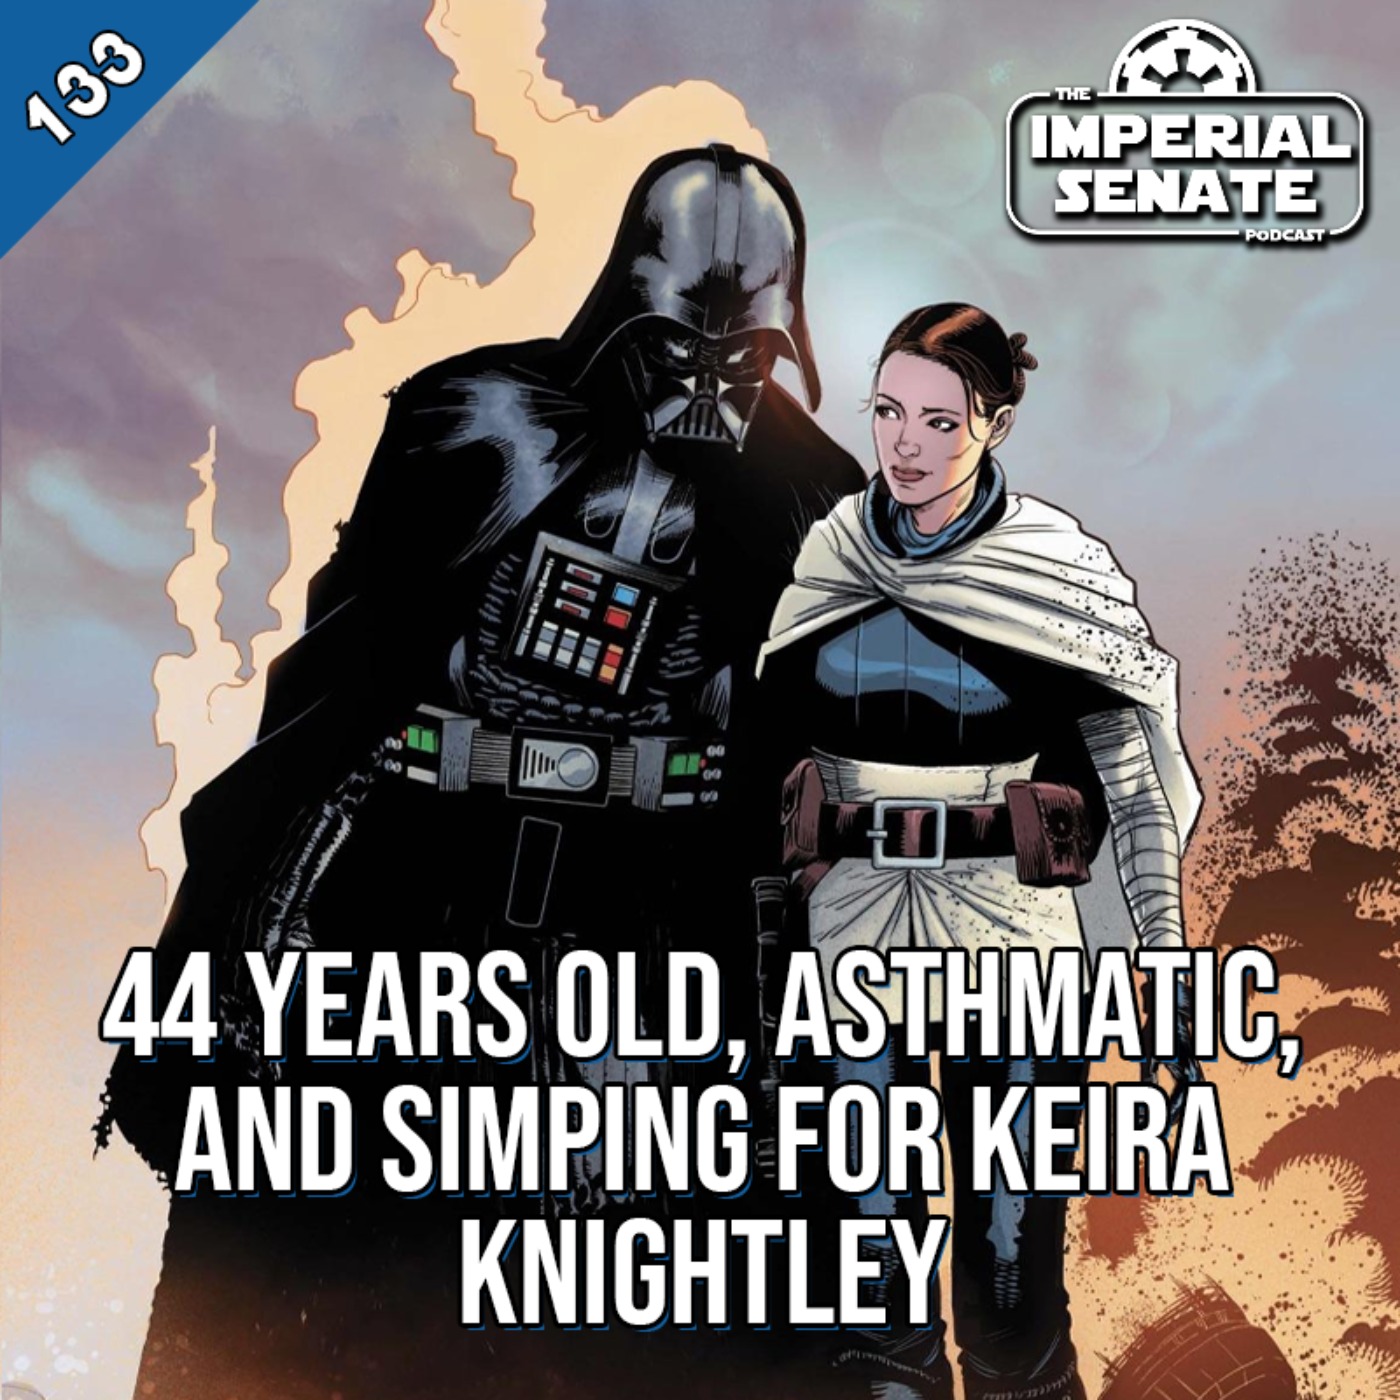 The Imperial Senate Podcast: Episode 133 - 44 Years Old, Asthmatic, And Simping For Keira Knightley